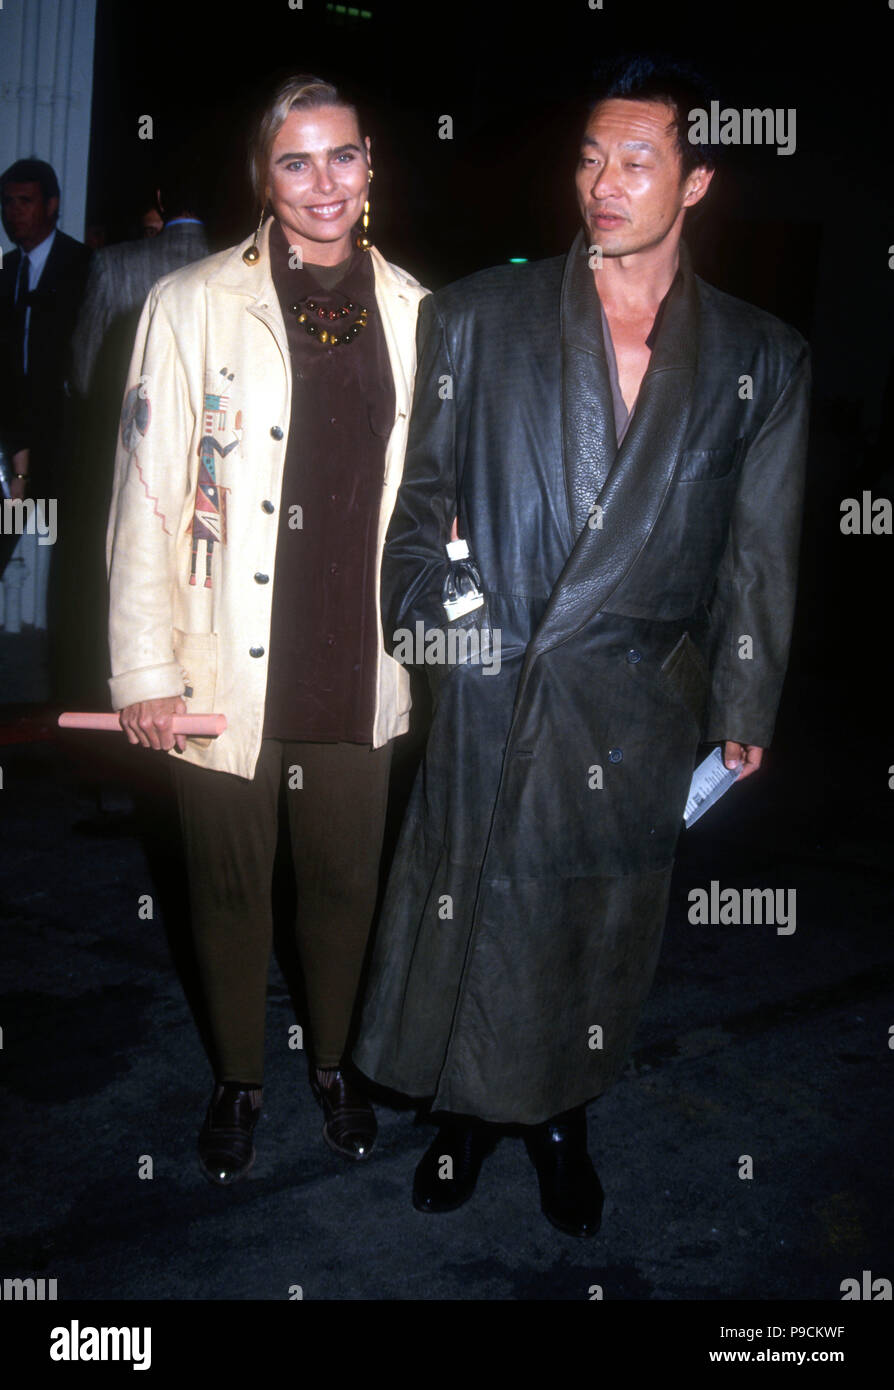 CULVER CITY, CA - MARCH 18: Actress Margaux Hemingway attends screening of 'Basic Instinct' on March 18, 1992 at Sony Studios in Culver City, California. Photo by Barry King/Alamy Stock Photo Stock Photo